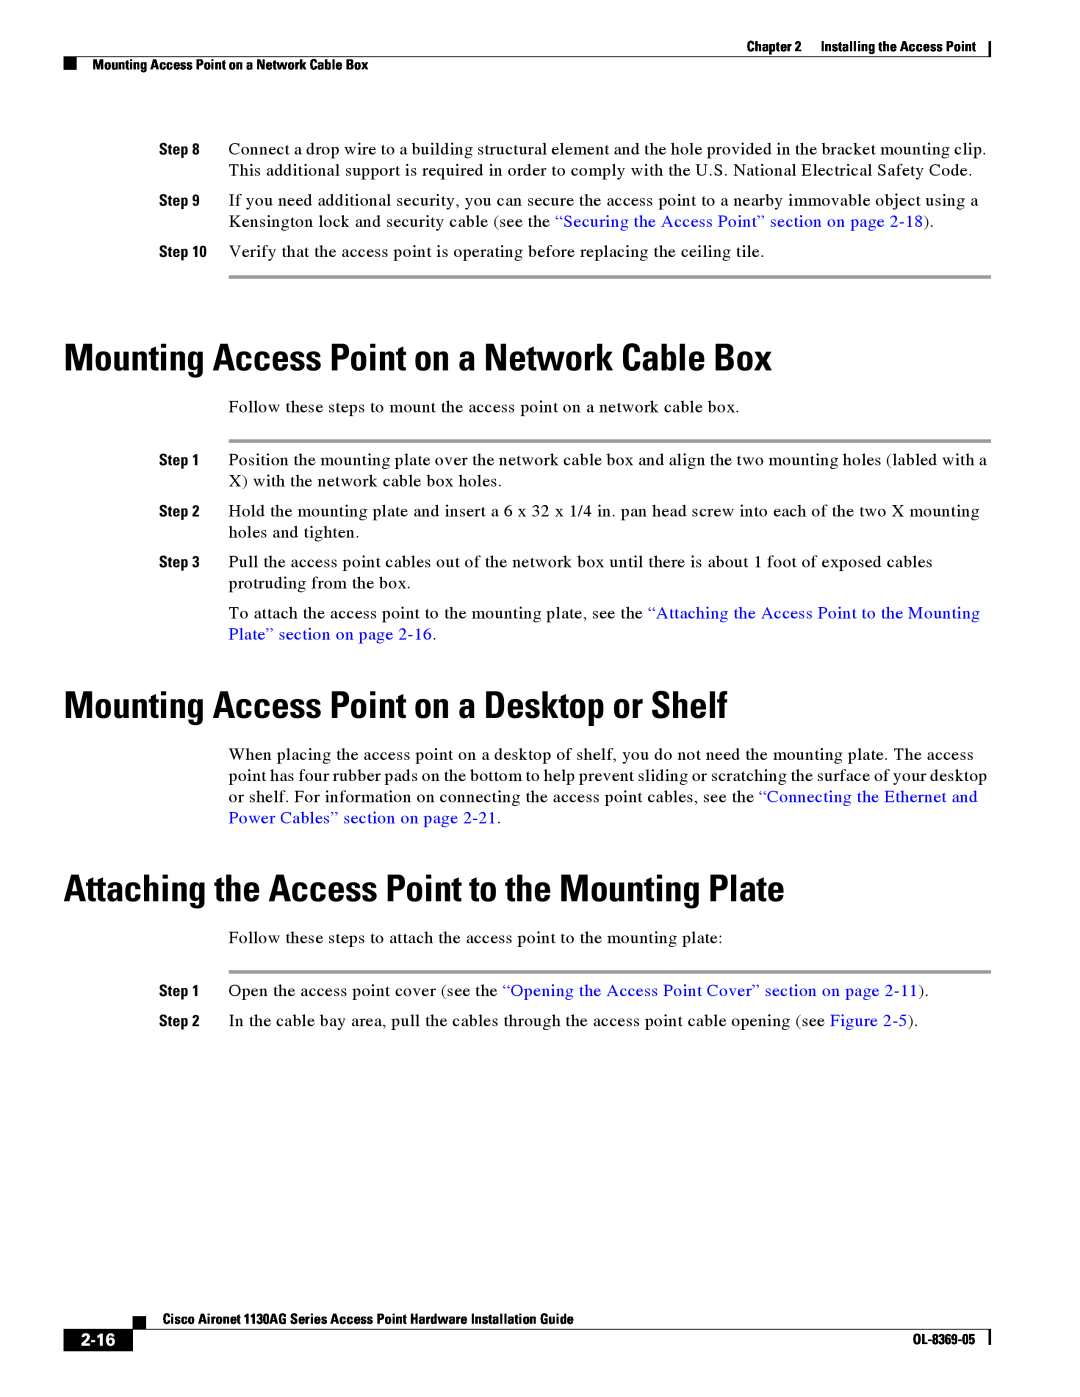 Cisco Systems 1130AG manual Mounting Access Point on a Network Cable Box, Mounting Access Point on a Desktop or Shelf, 2-16 